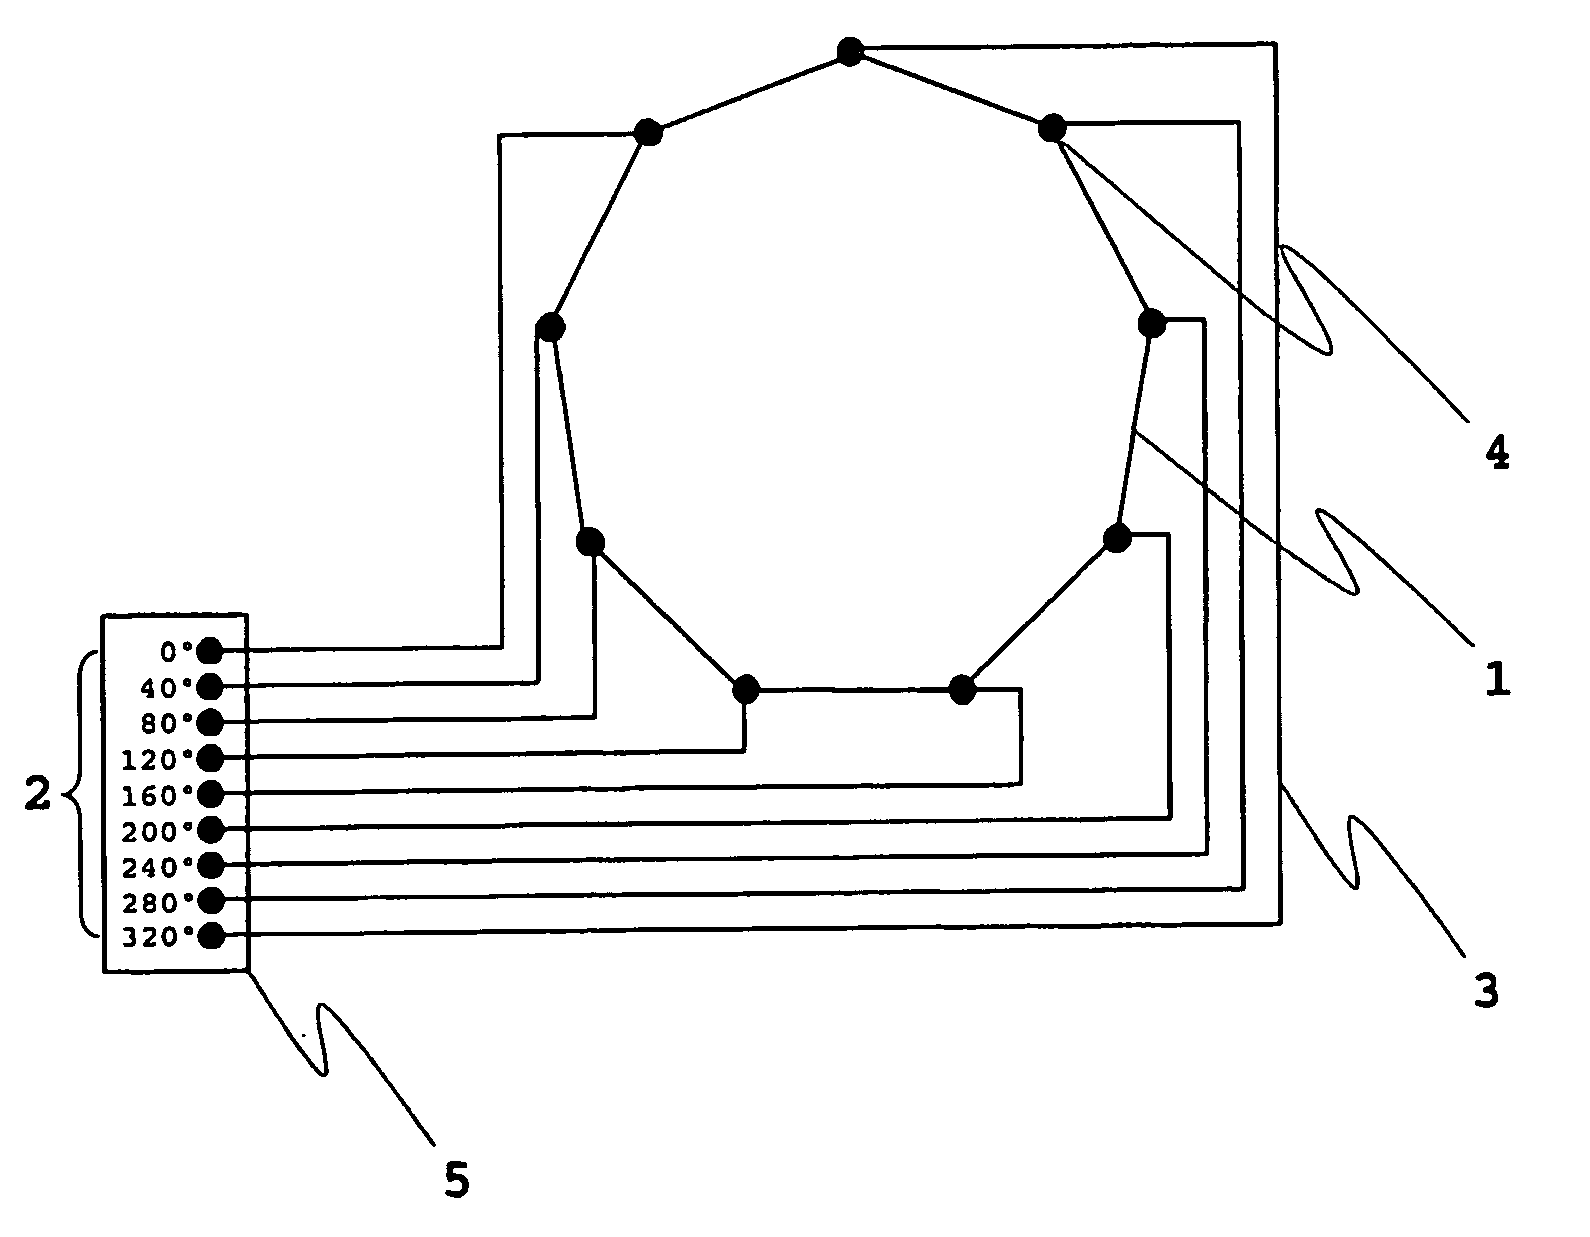 High phase order electrical rotating machine with distributed windings